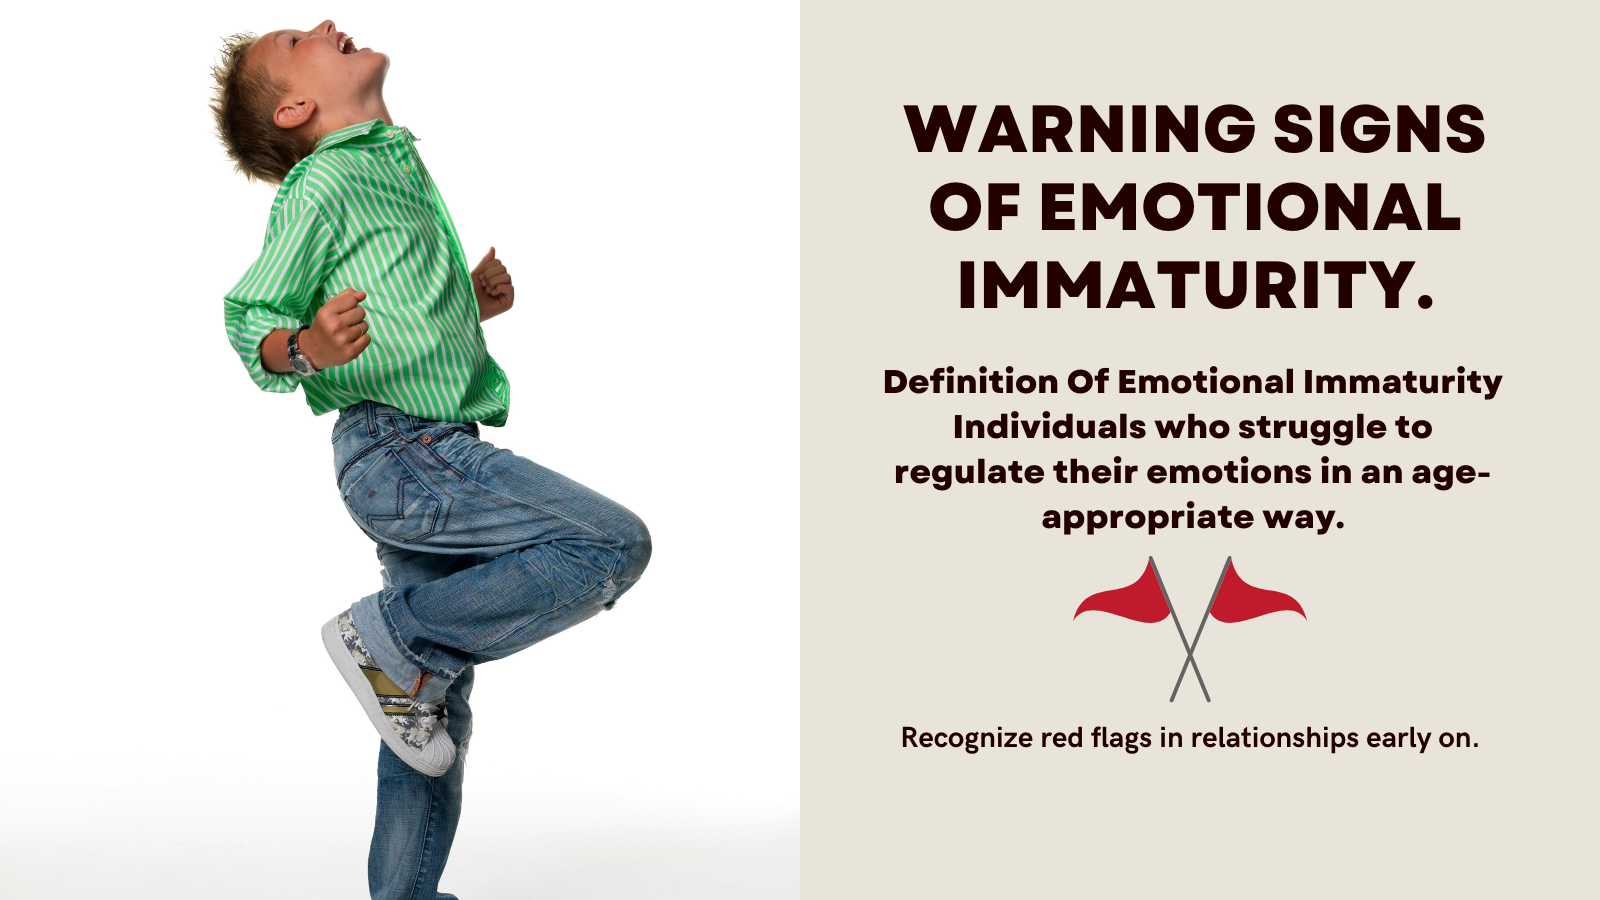 Warning Signs of Emotional Immaturity.